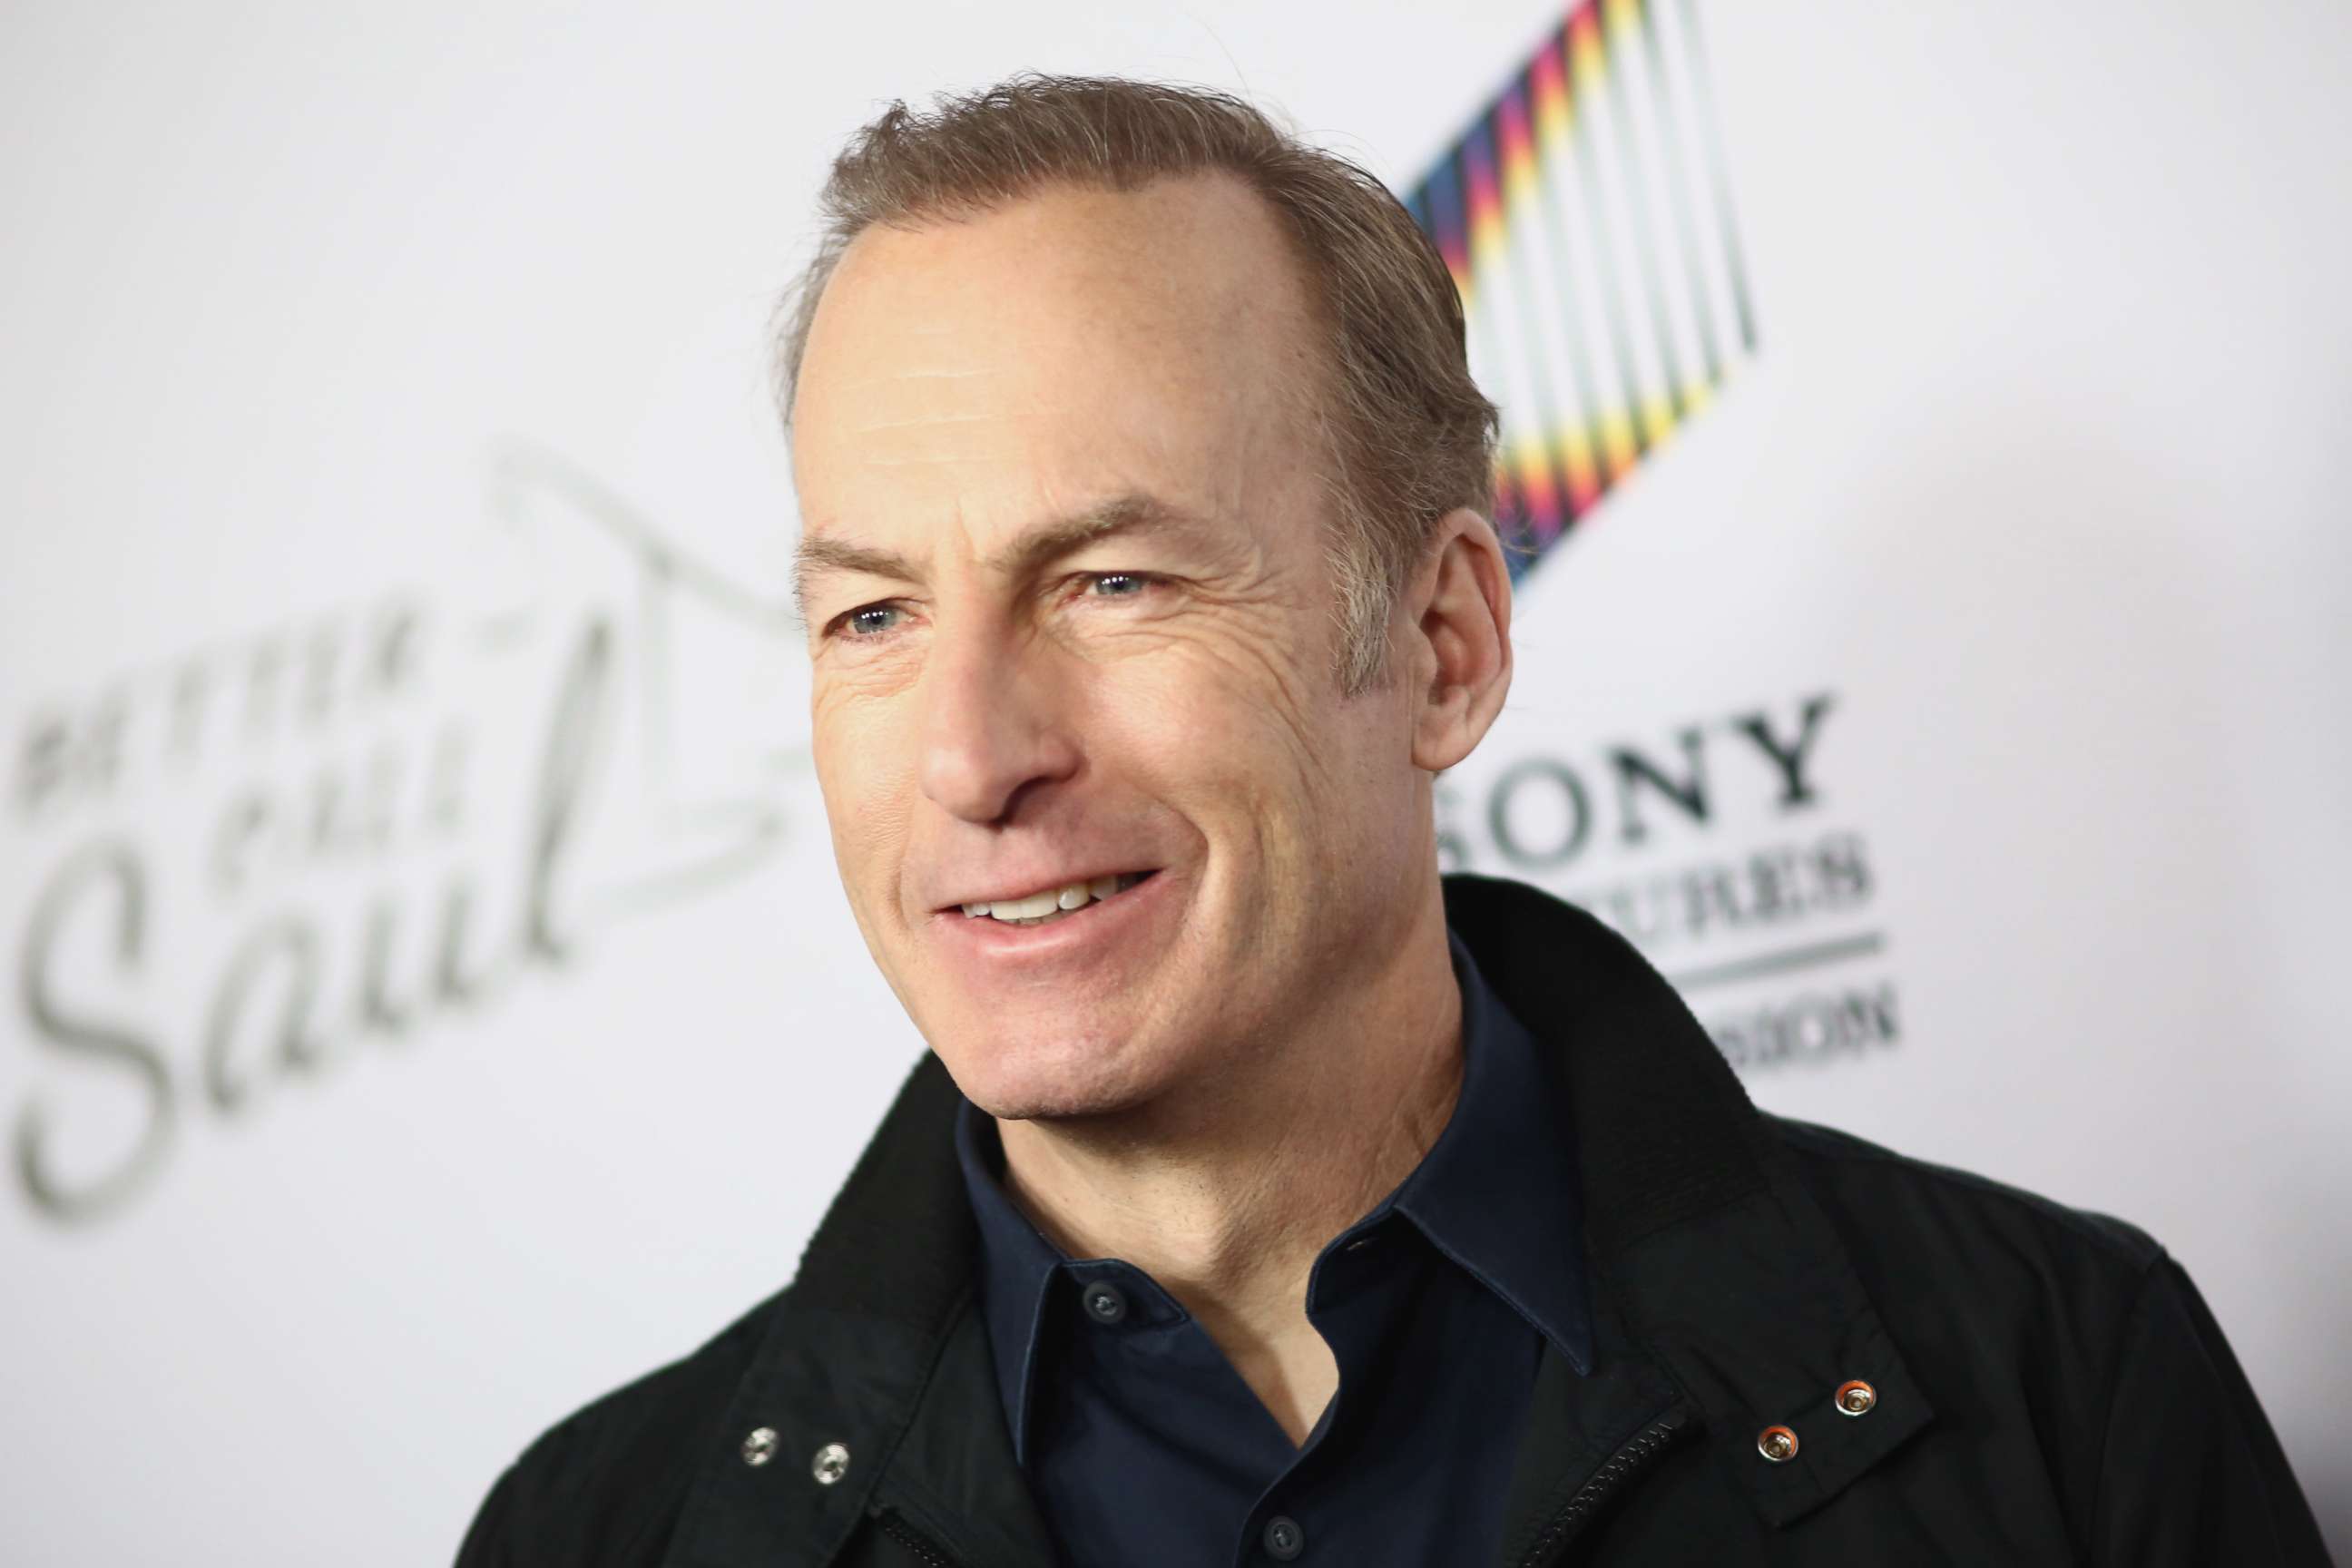 PHOTO: Bob Odenkirk attends the premiere of AMC's "Better Call Saul," season 5 at ArcLight Cinemas on Feb. 05, 2020, in Hollywood, Calif.